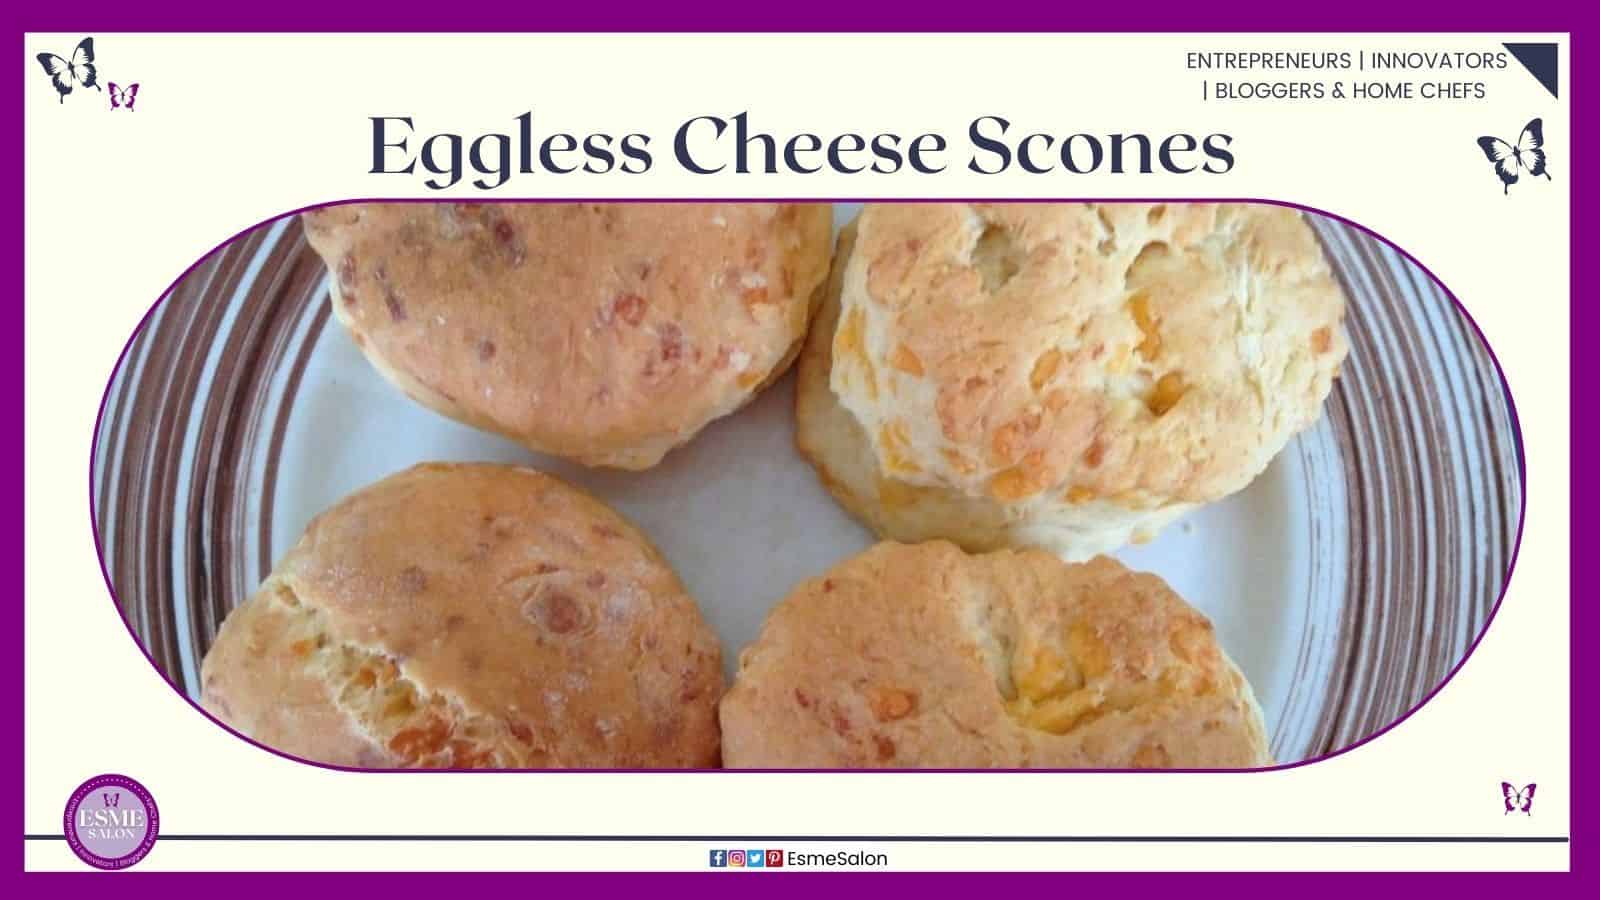 an image of 4 Eggless Cheese Scones on a silver plate